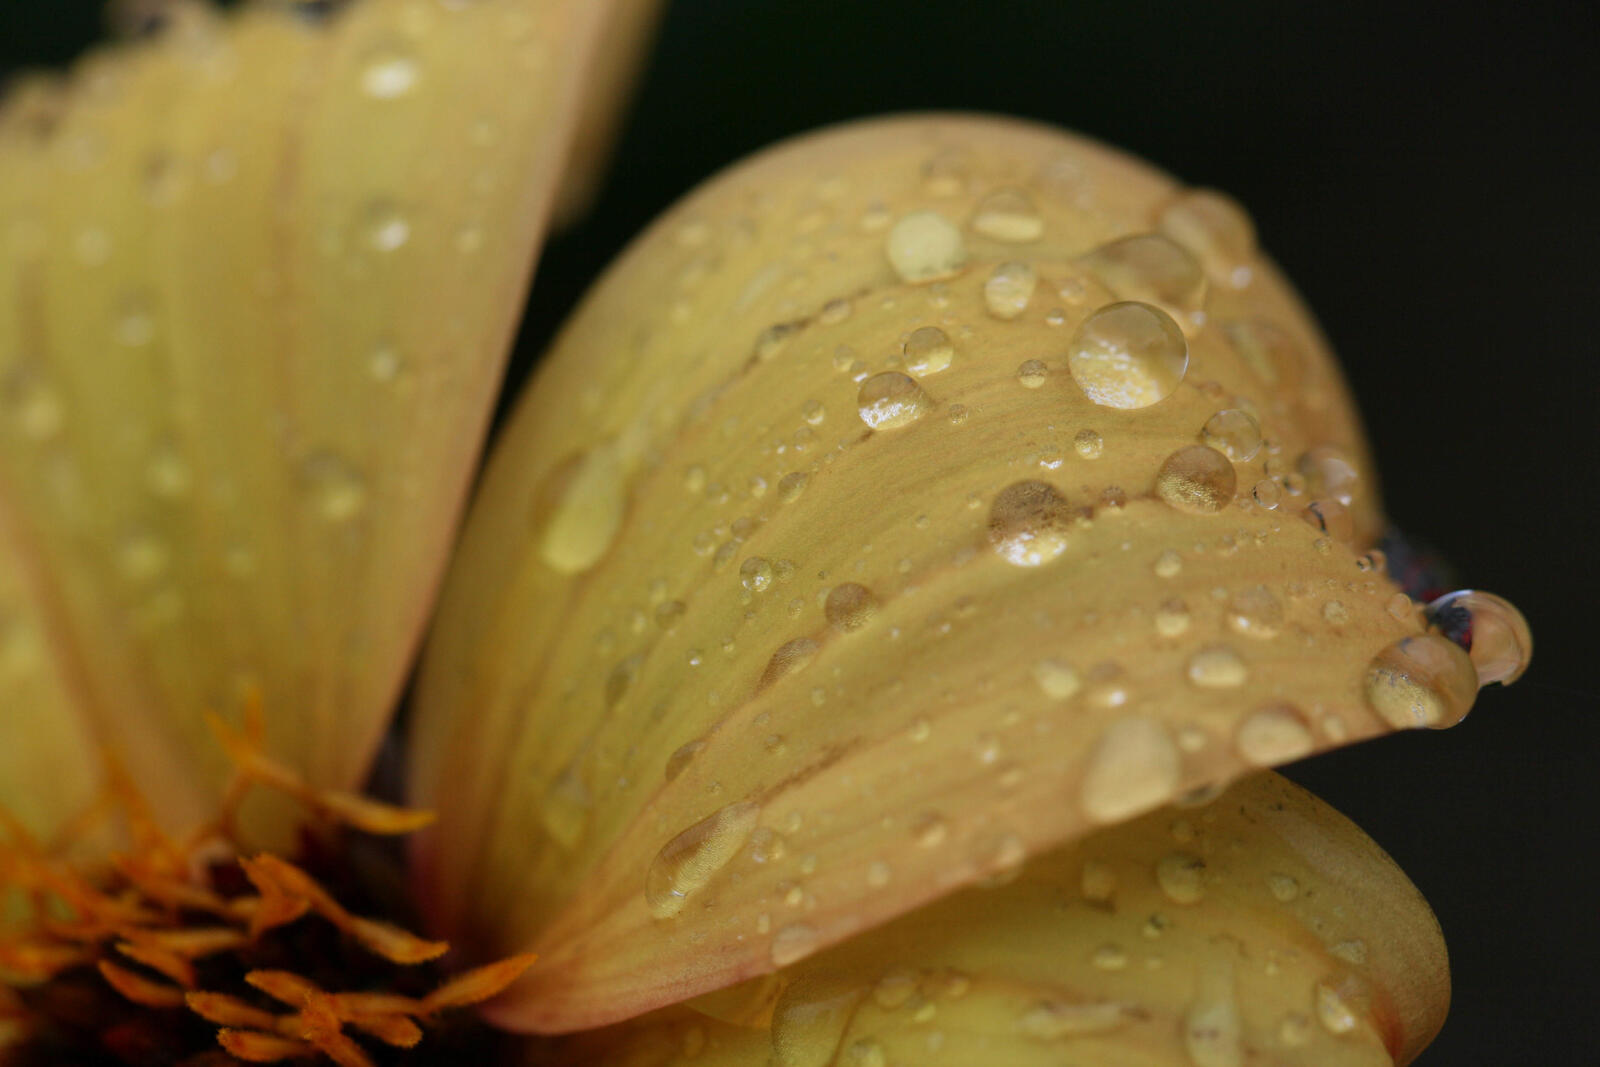 Free photo A flower with yellow petals and raindrops